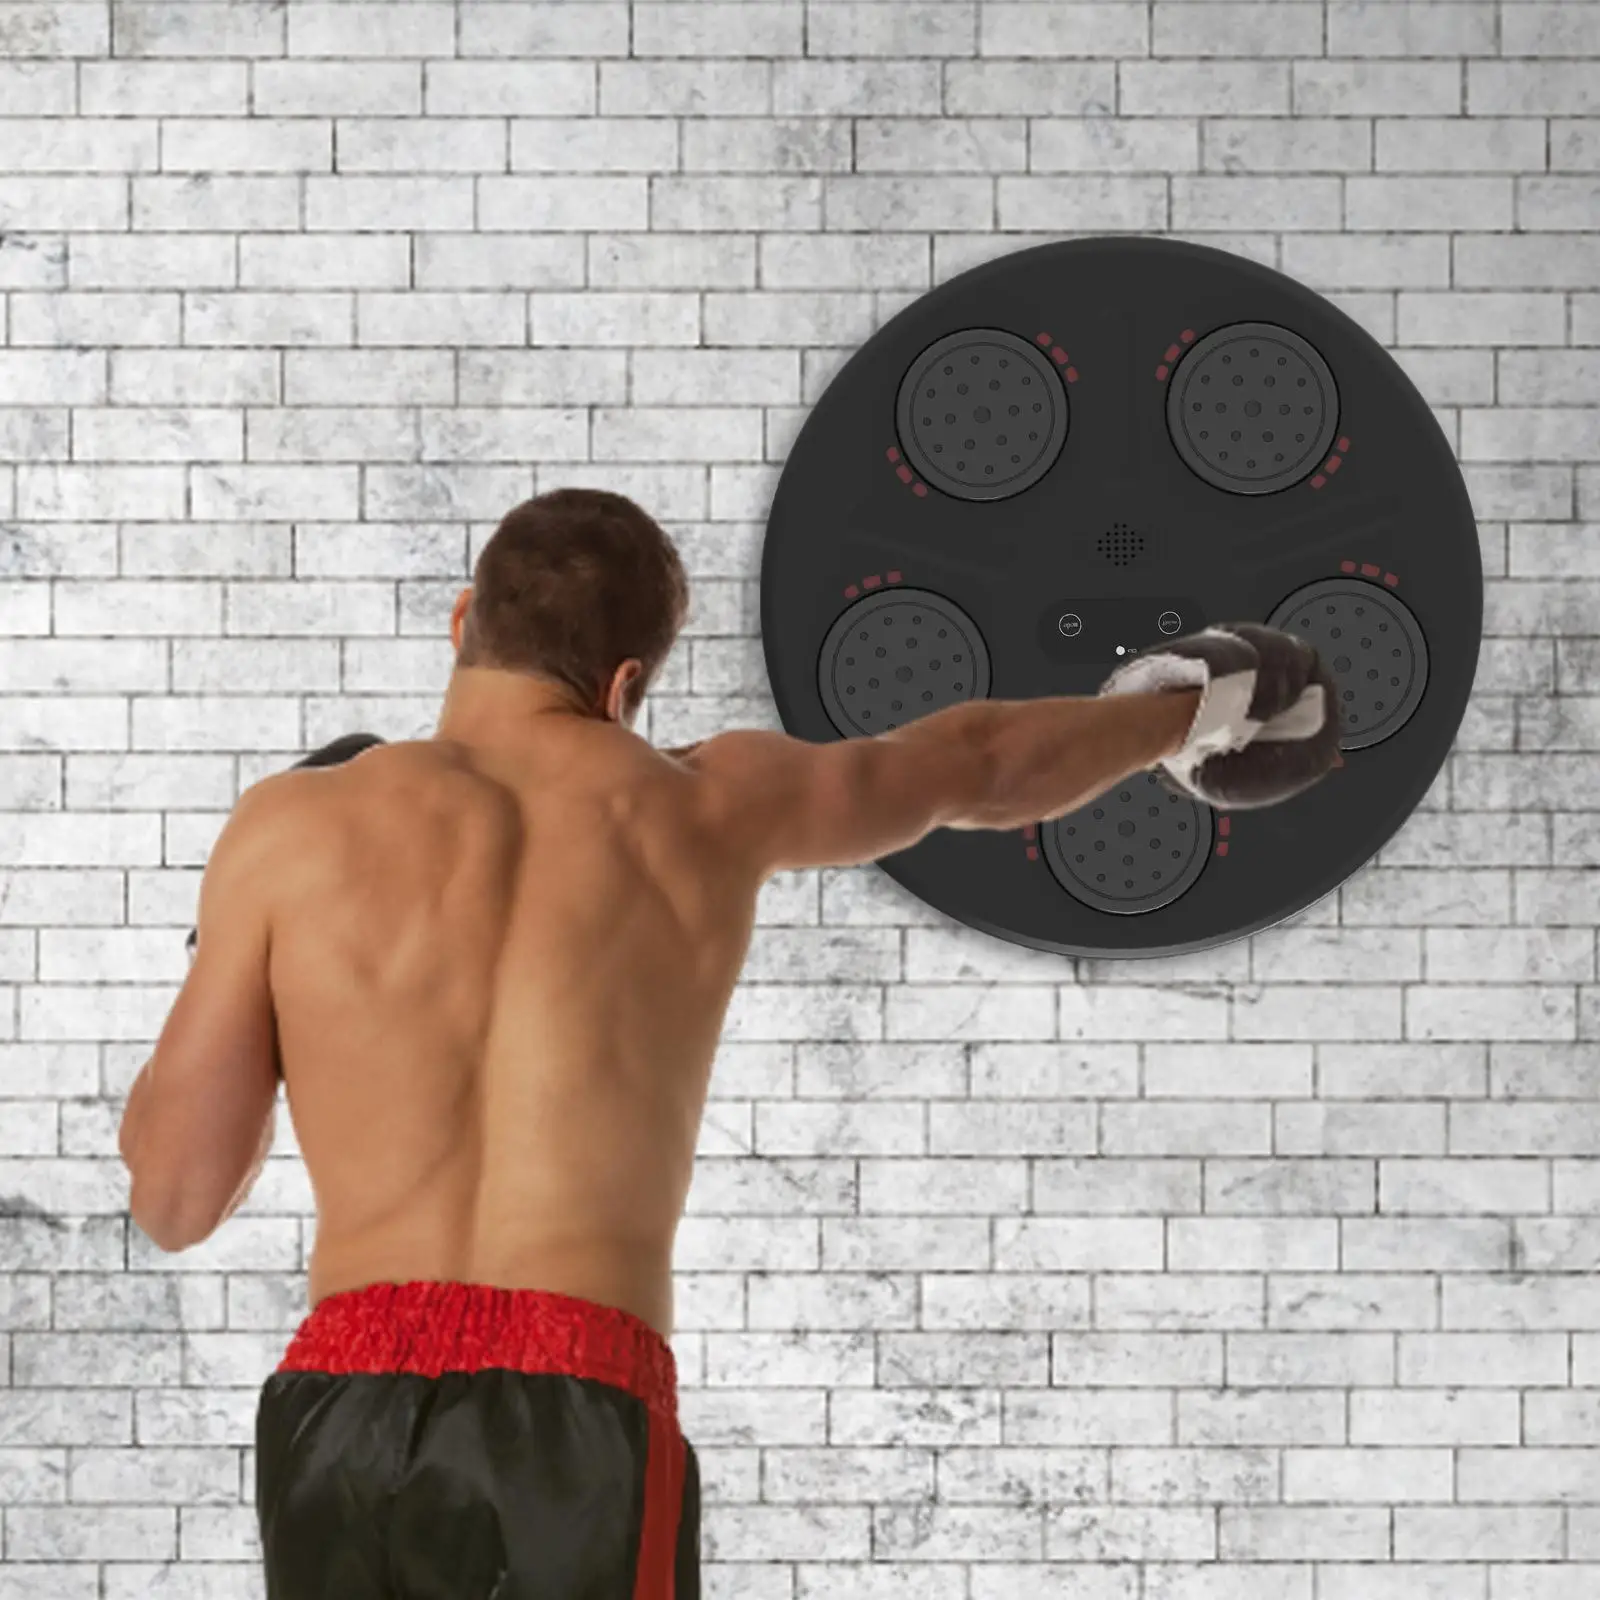 Smart Music Boxing Machine Wall Mounted Sports Workout Electronic Musical Target Response Coordination Reaction Improves Agility